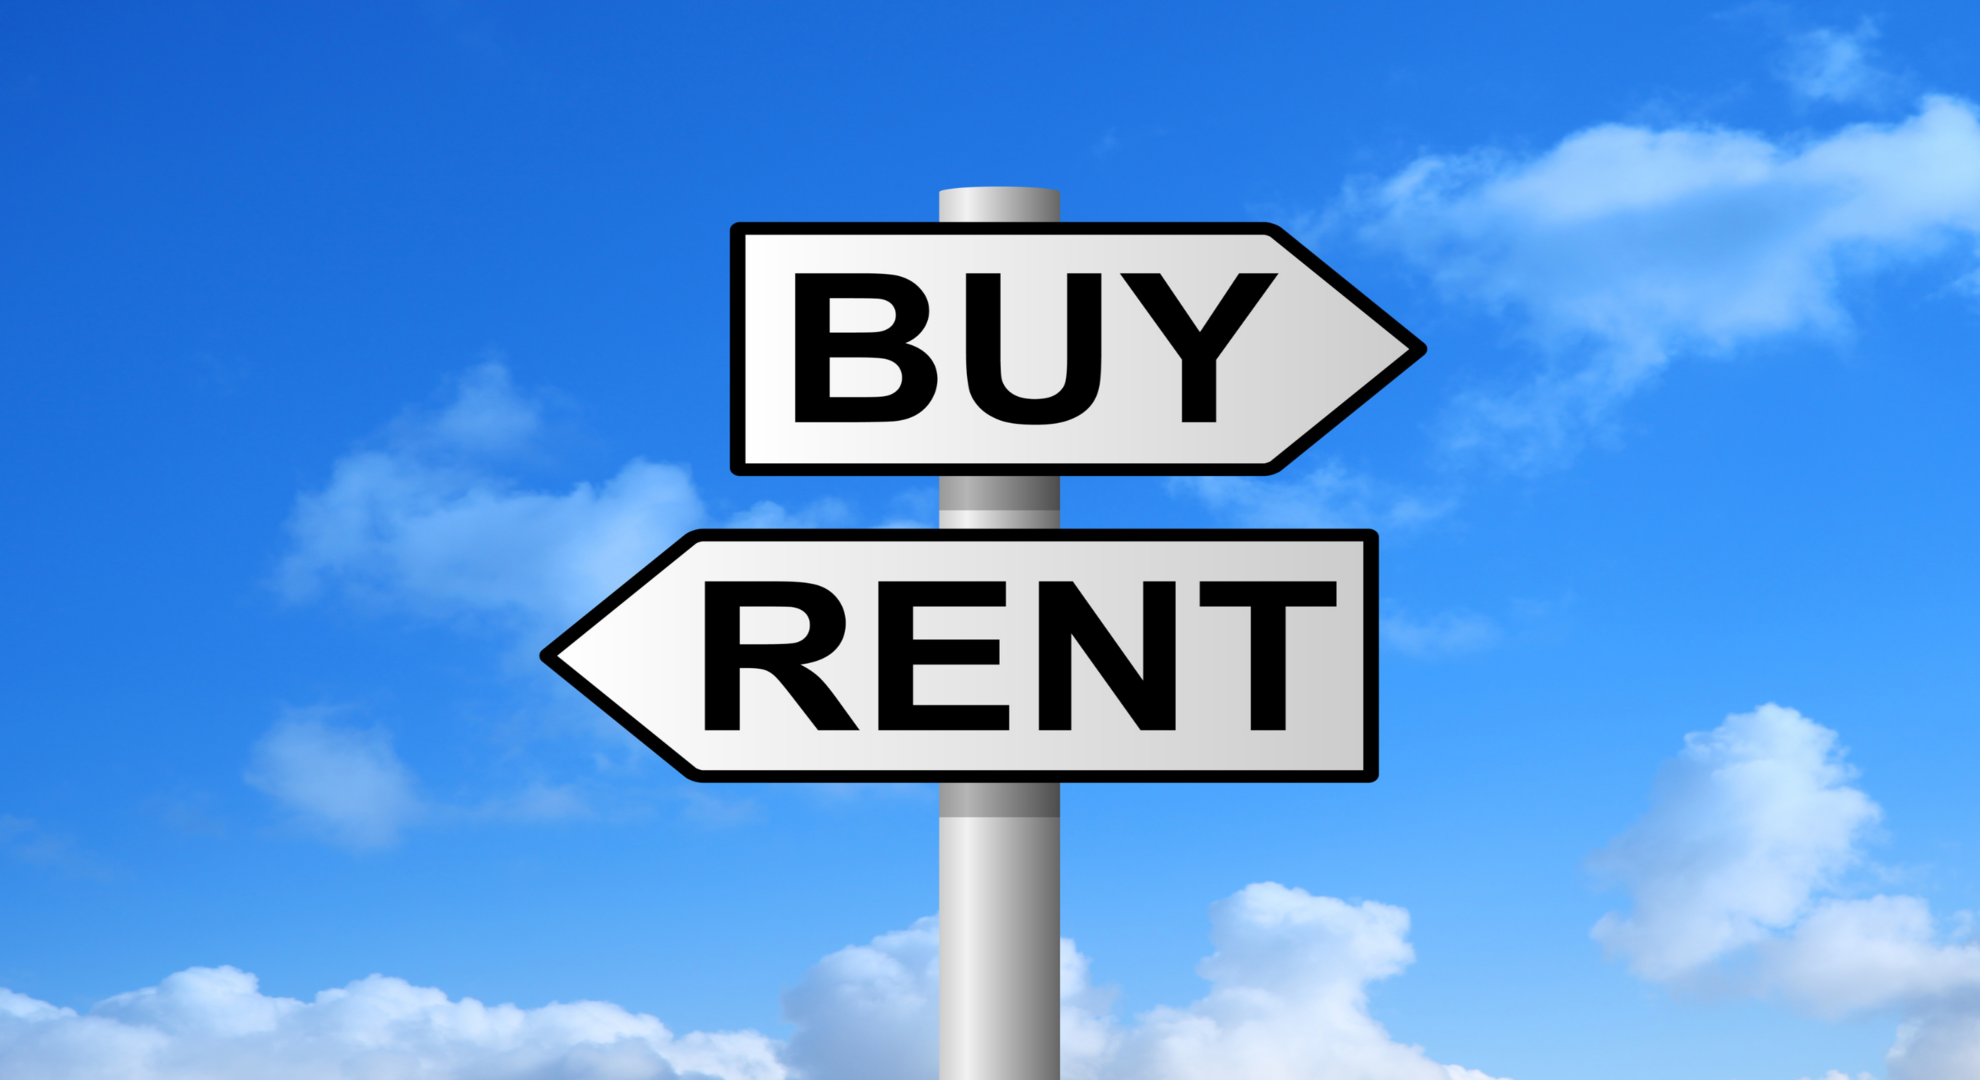 TWO REASONS TO BUY VS. RENT